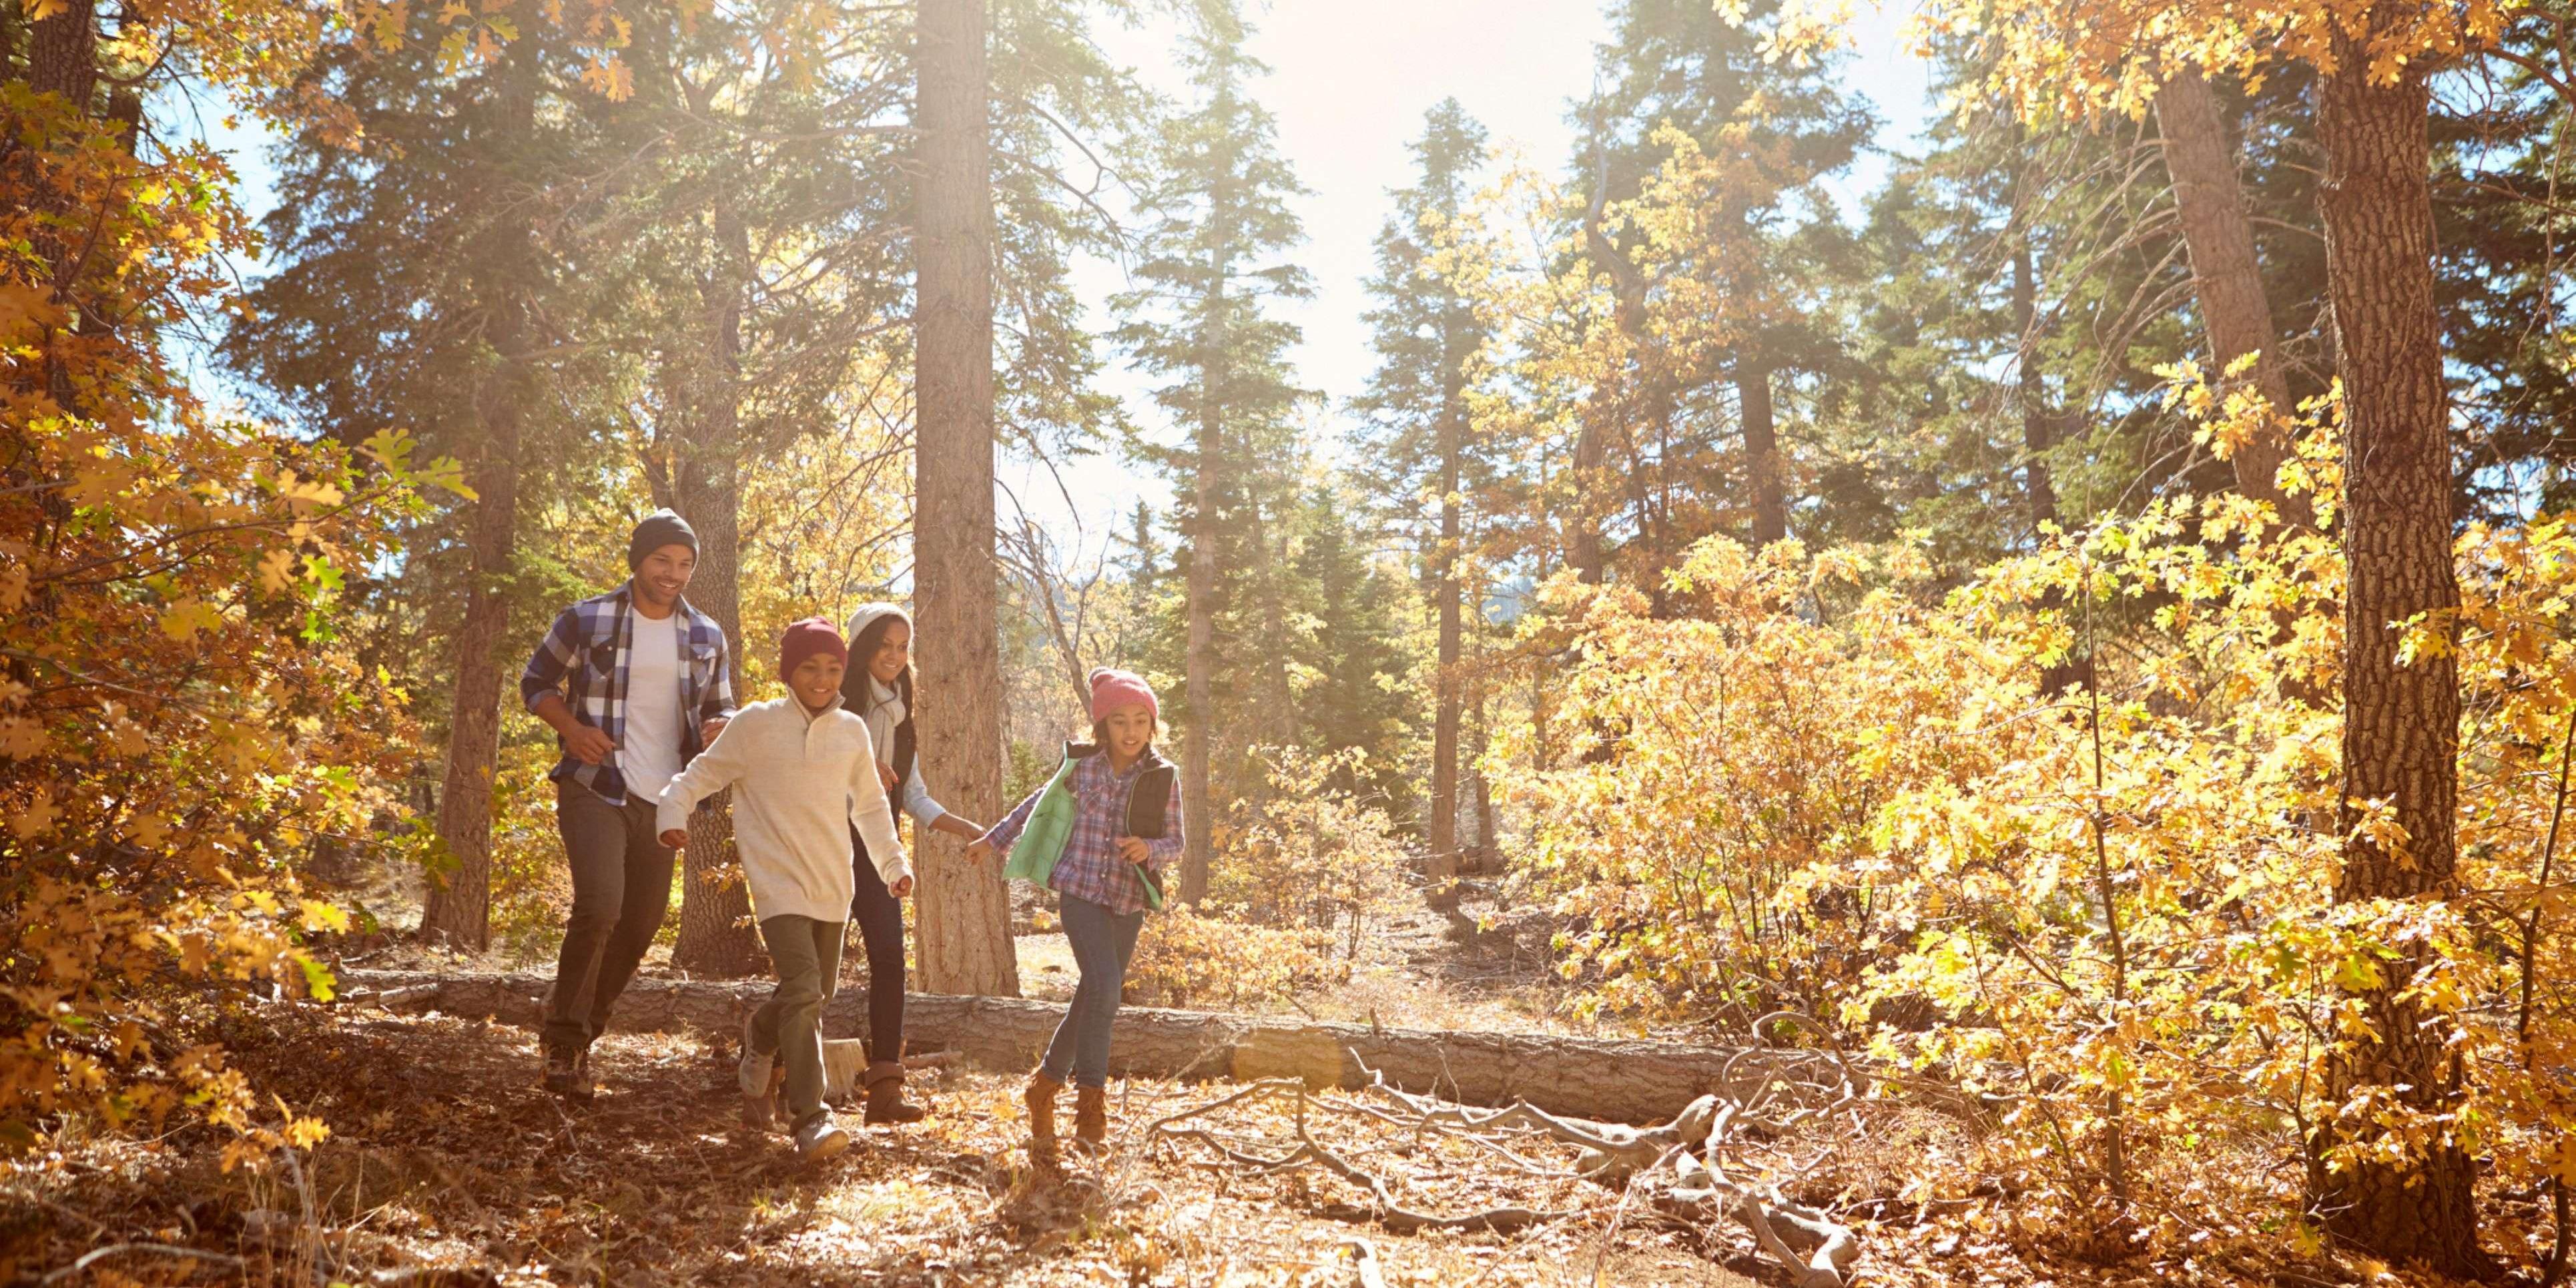 Take in a hike or enjoy one of several area parks while staying with us.